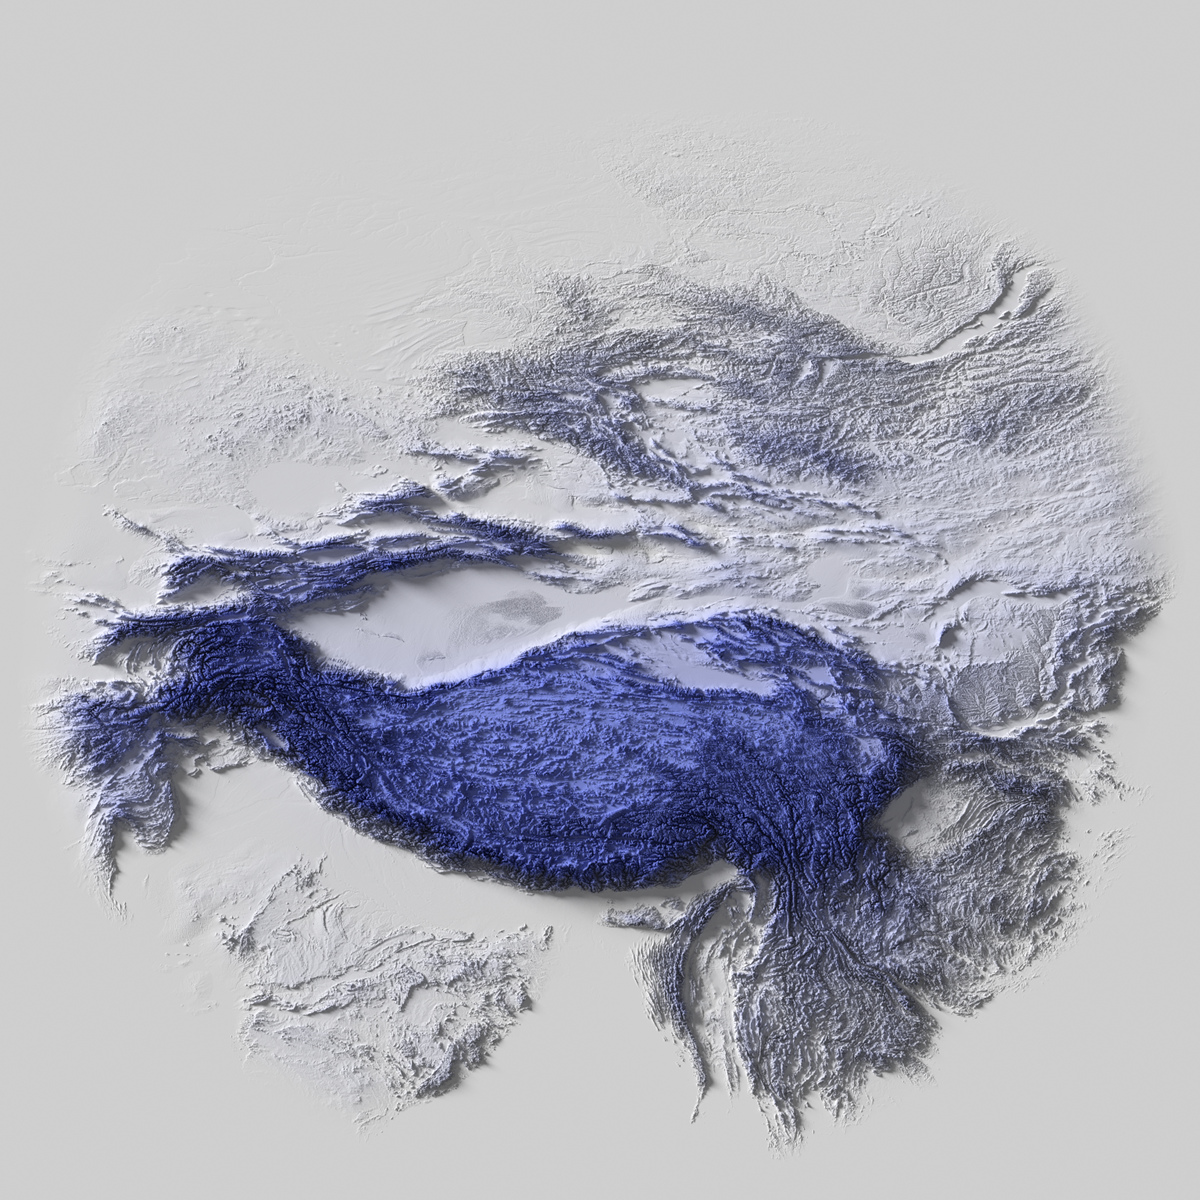 Preview of terrain heightmap render of the regions around the Himalayas using heightfield shading mapping